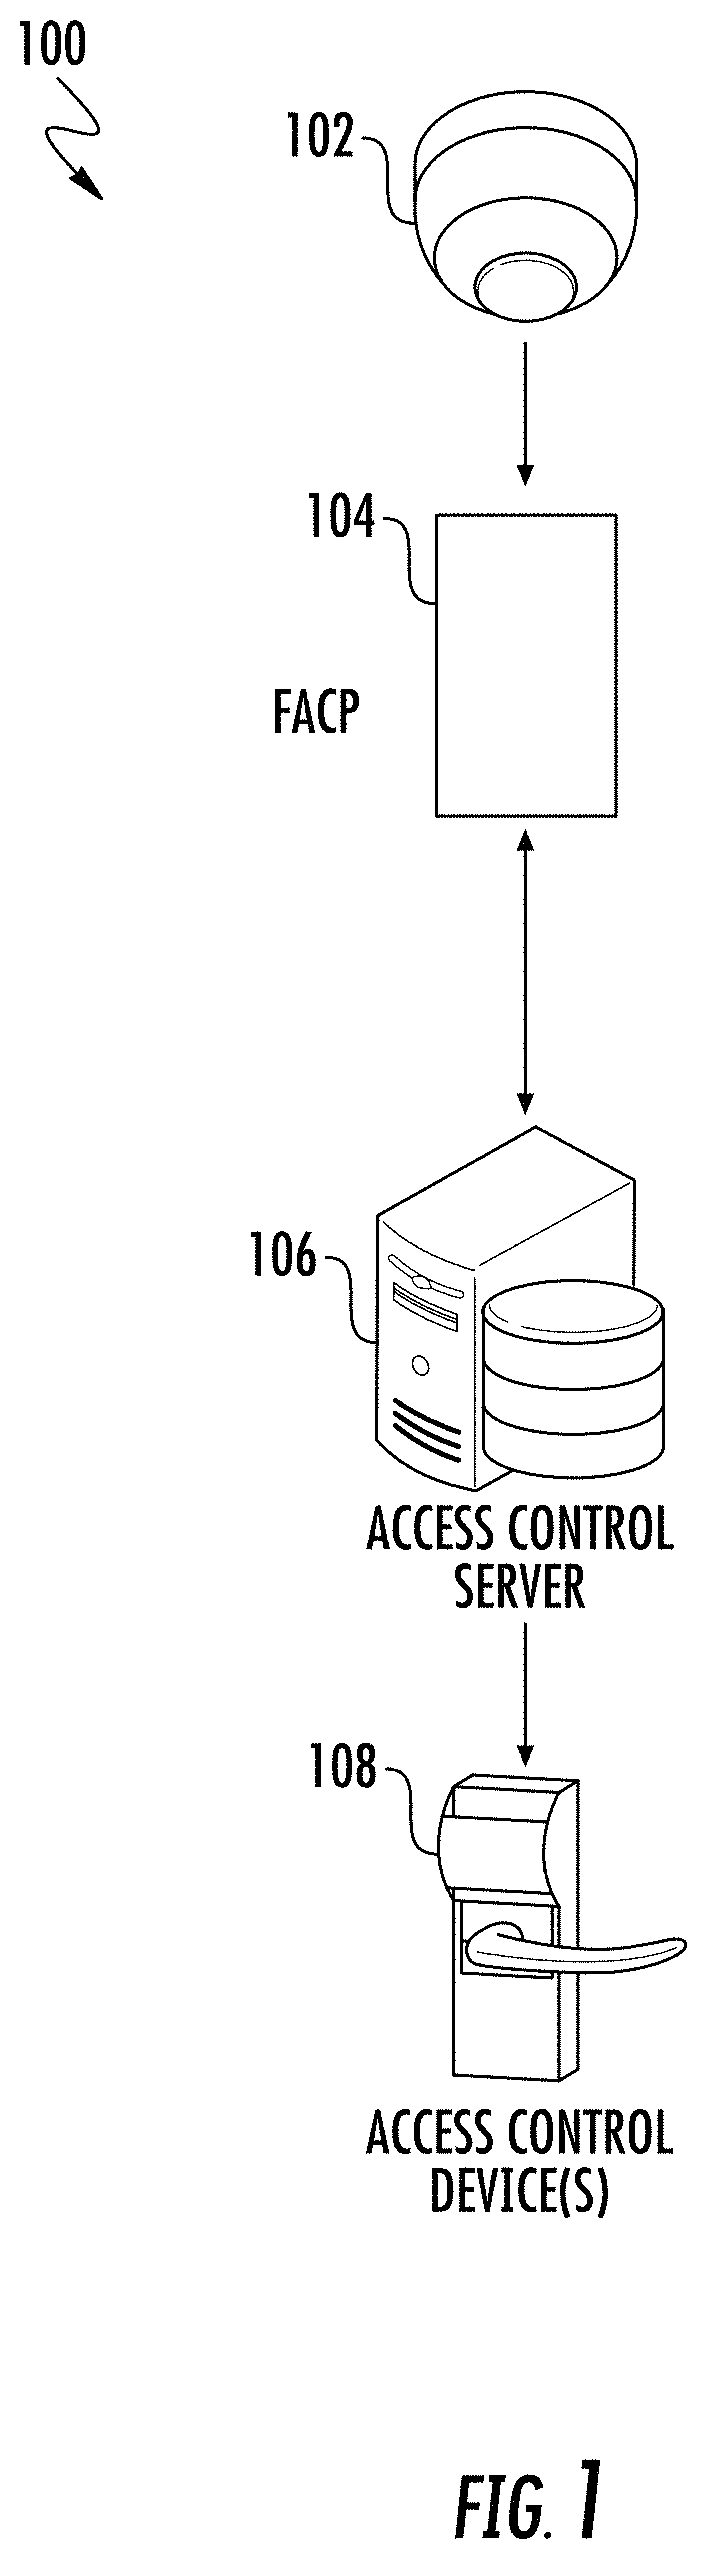 Using access control devices to send event notifications and to detect user presence